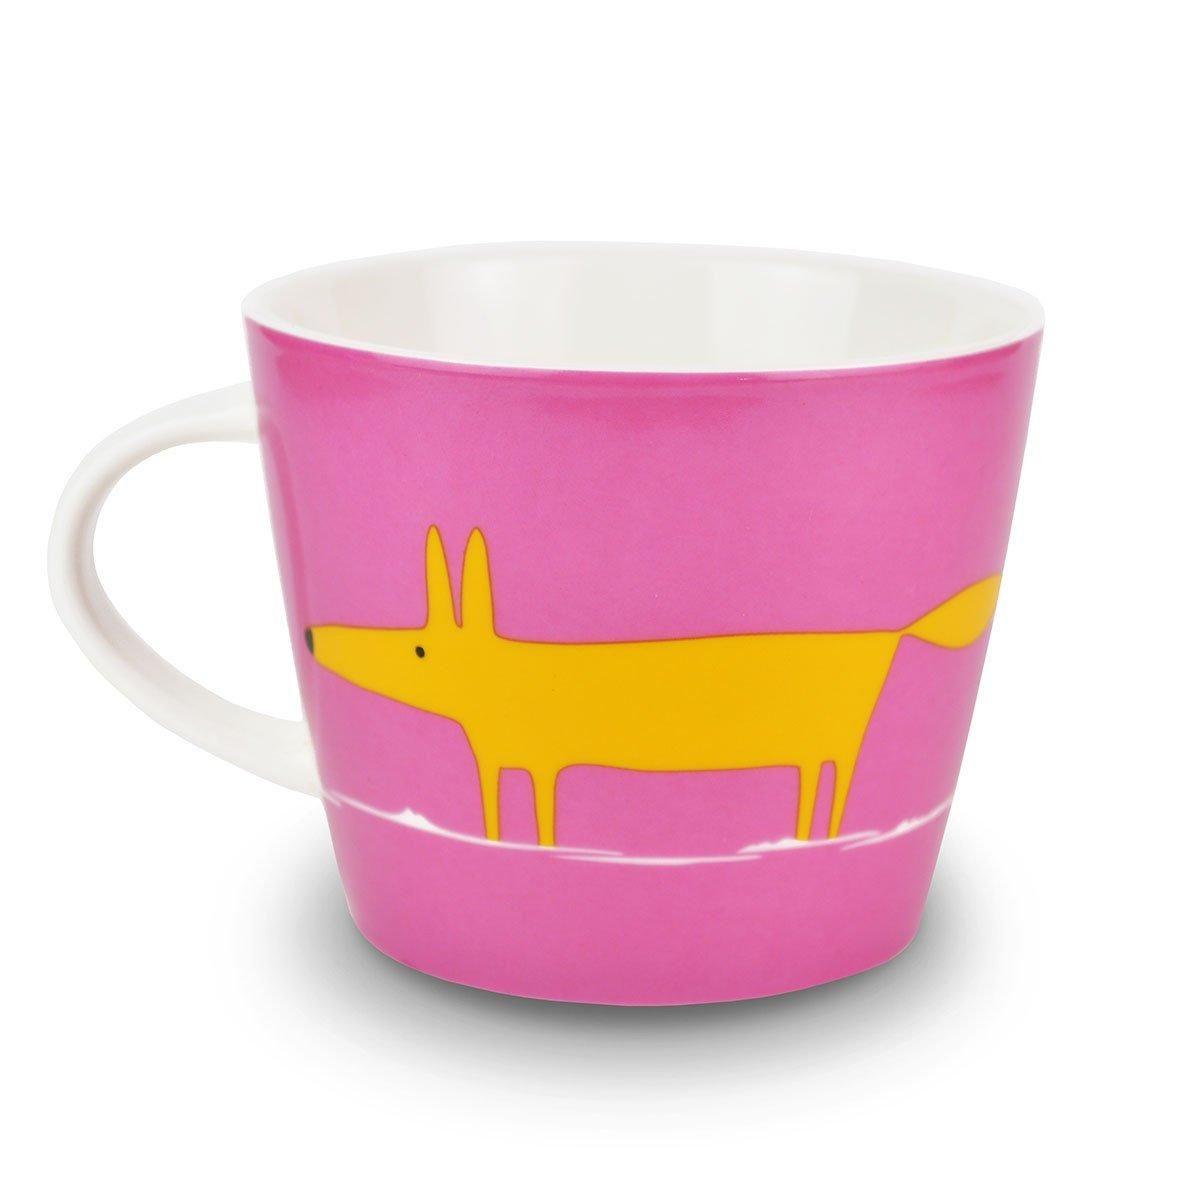  Mugs And Cups SC-0010 